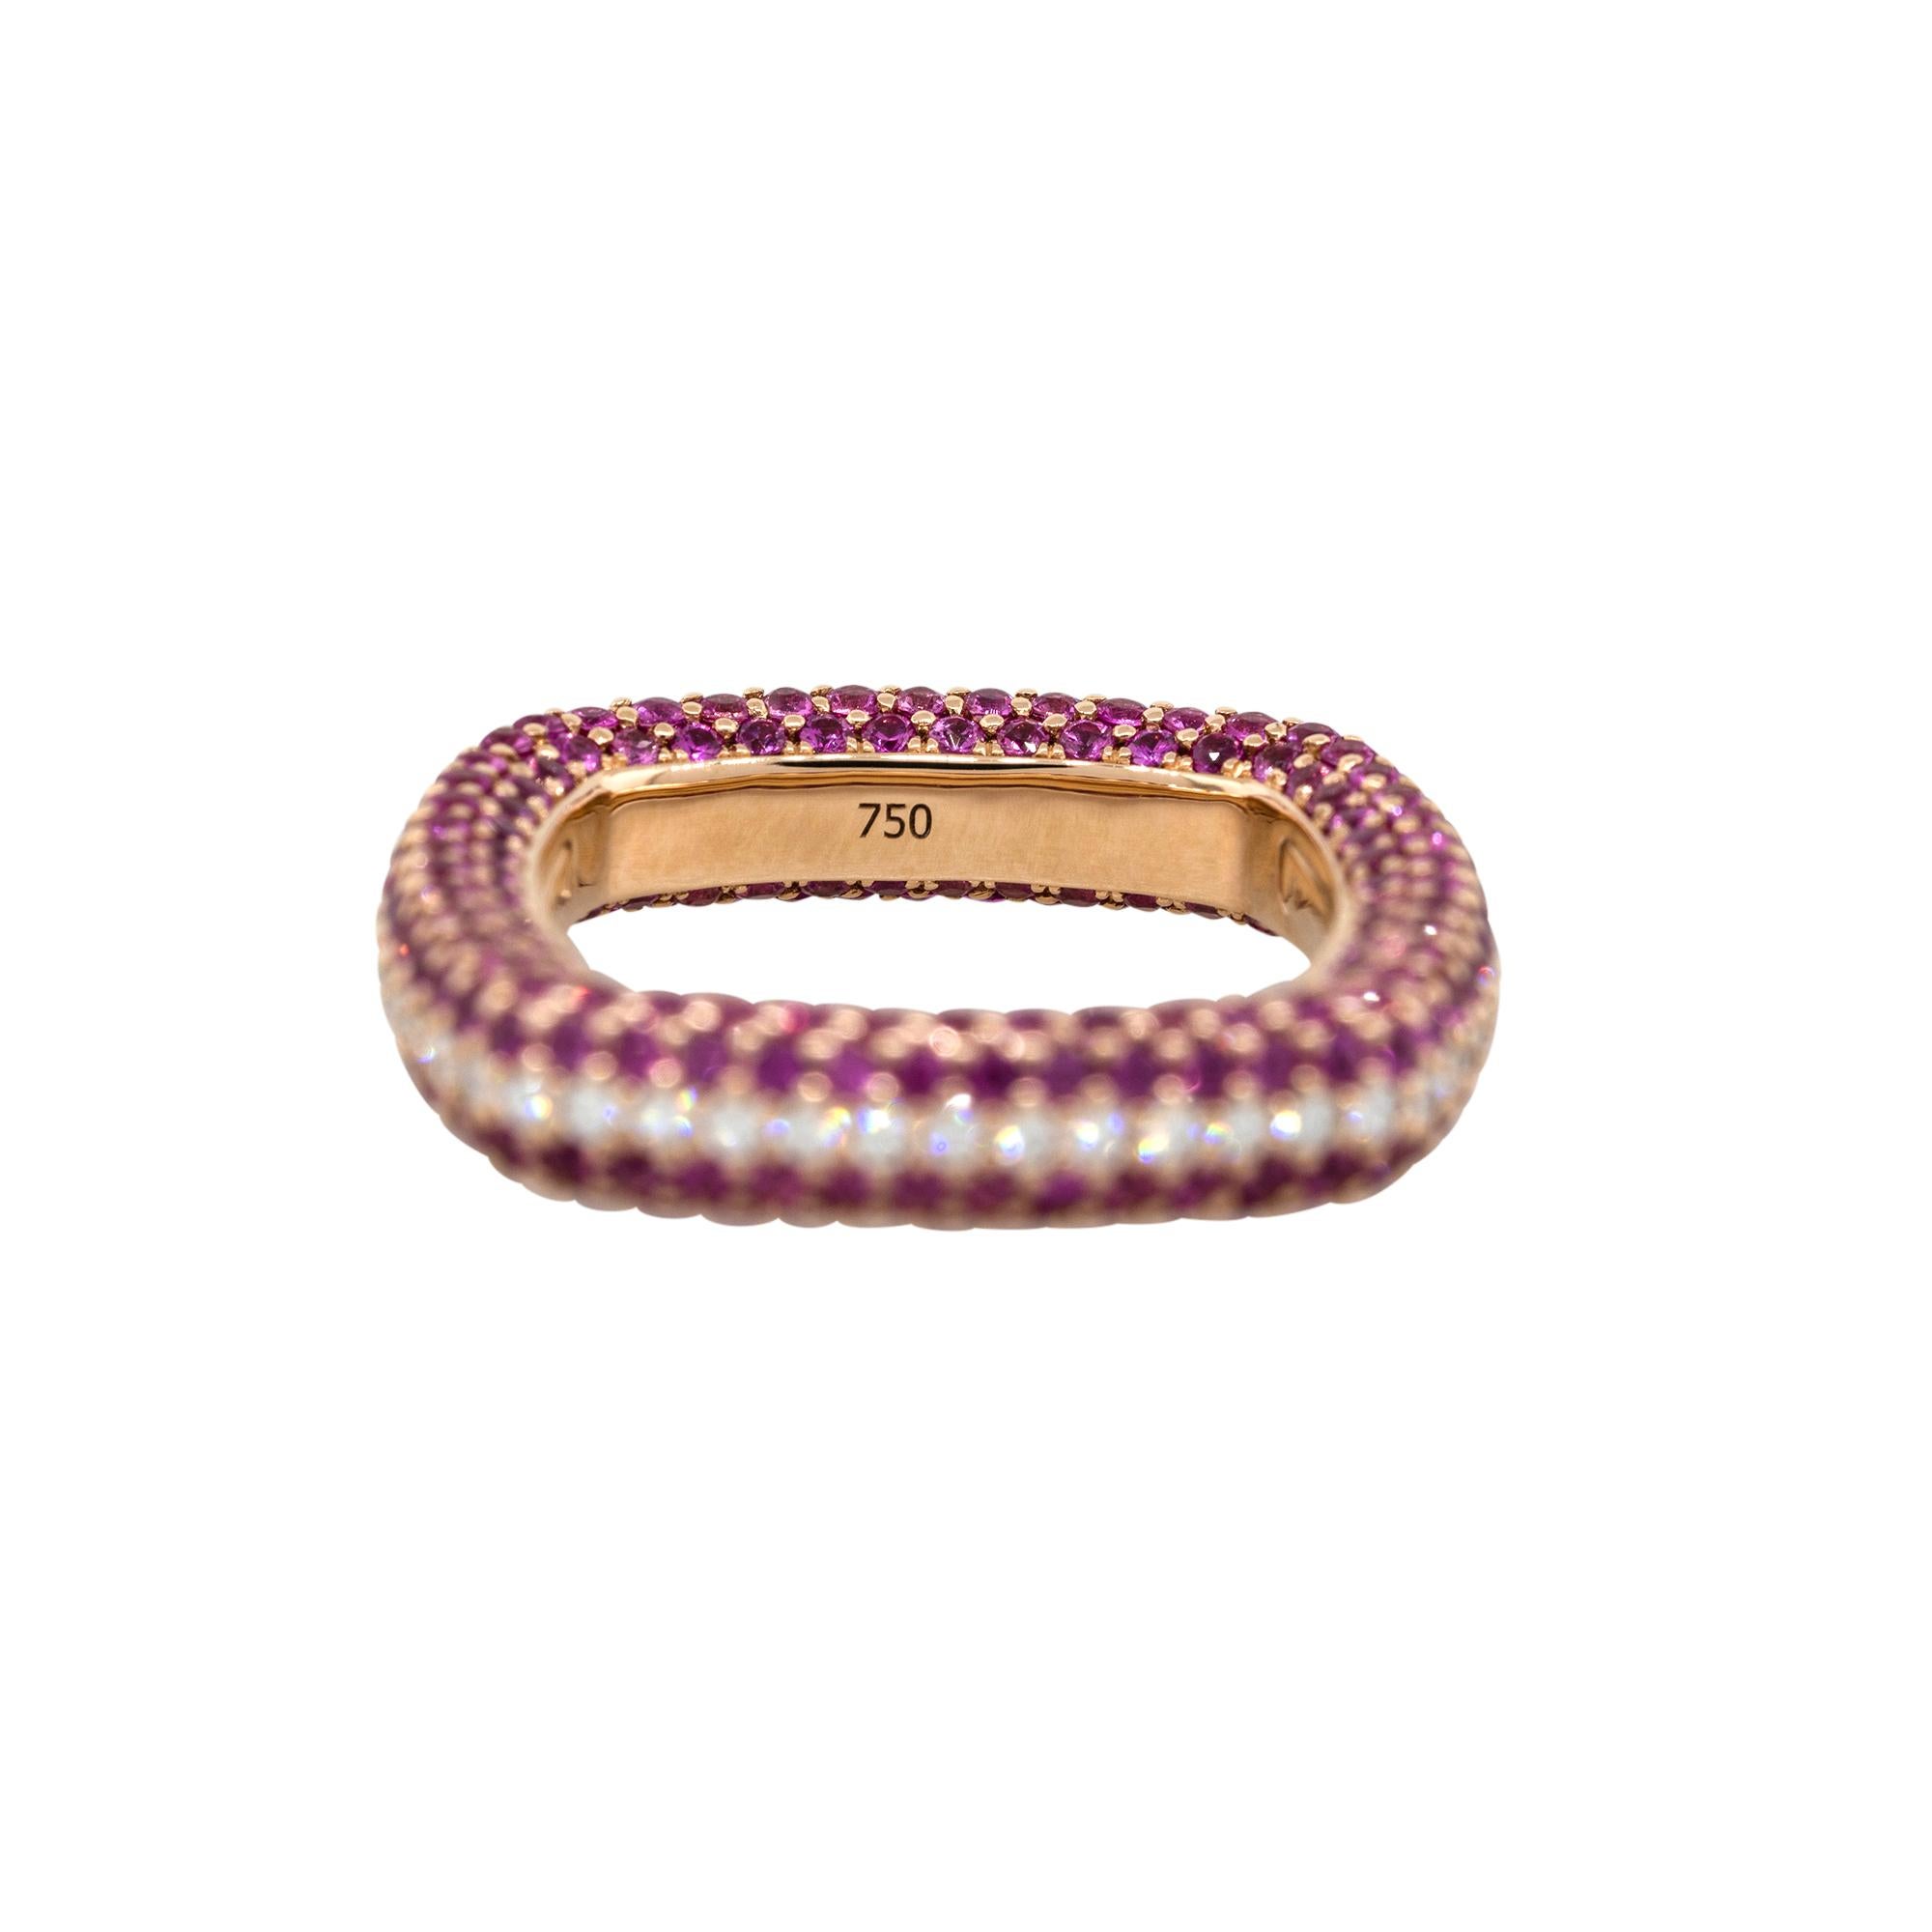 Material: 18k rose gold
Diamond details: Approx. 0.51ctw of round cut diamonds. Diamonds are G/H in color and VS in clarity
Gemstone details: Approx. 3.25ctw  of round cut pink sapphires
Ring Size: 6.5 
Total Weight: 7.1g (4.6dwt)
Measurements: 1